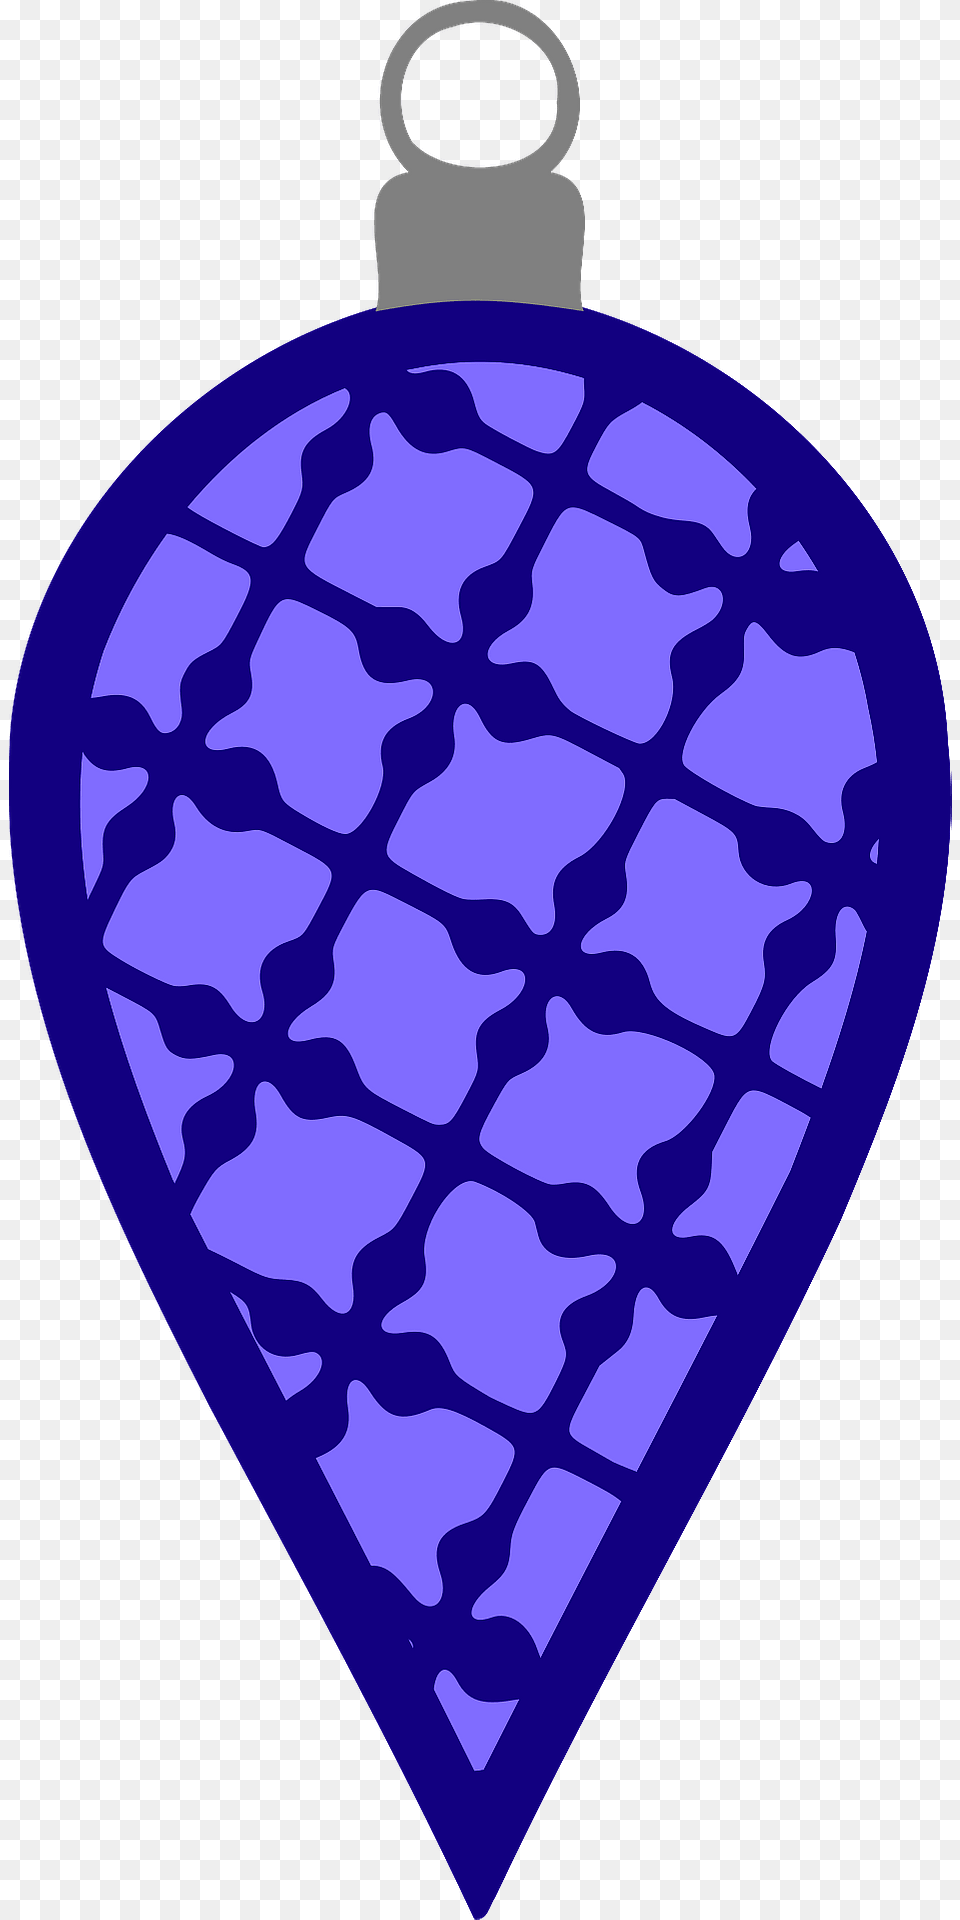 Simple Blue With Crosshatch Pattern Christmas Bulb Clipart, Clothing, Swimwear, Home Decor, Accessories Free Transparent Png